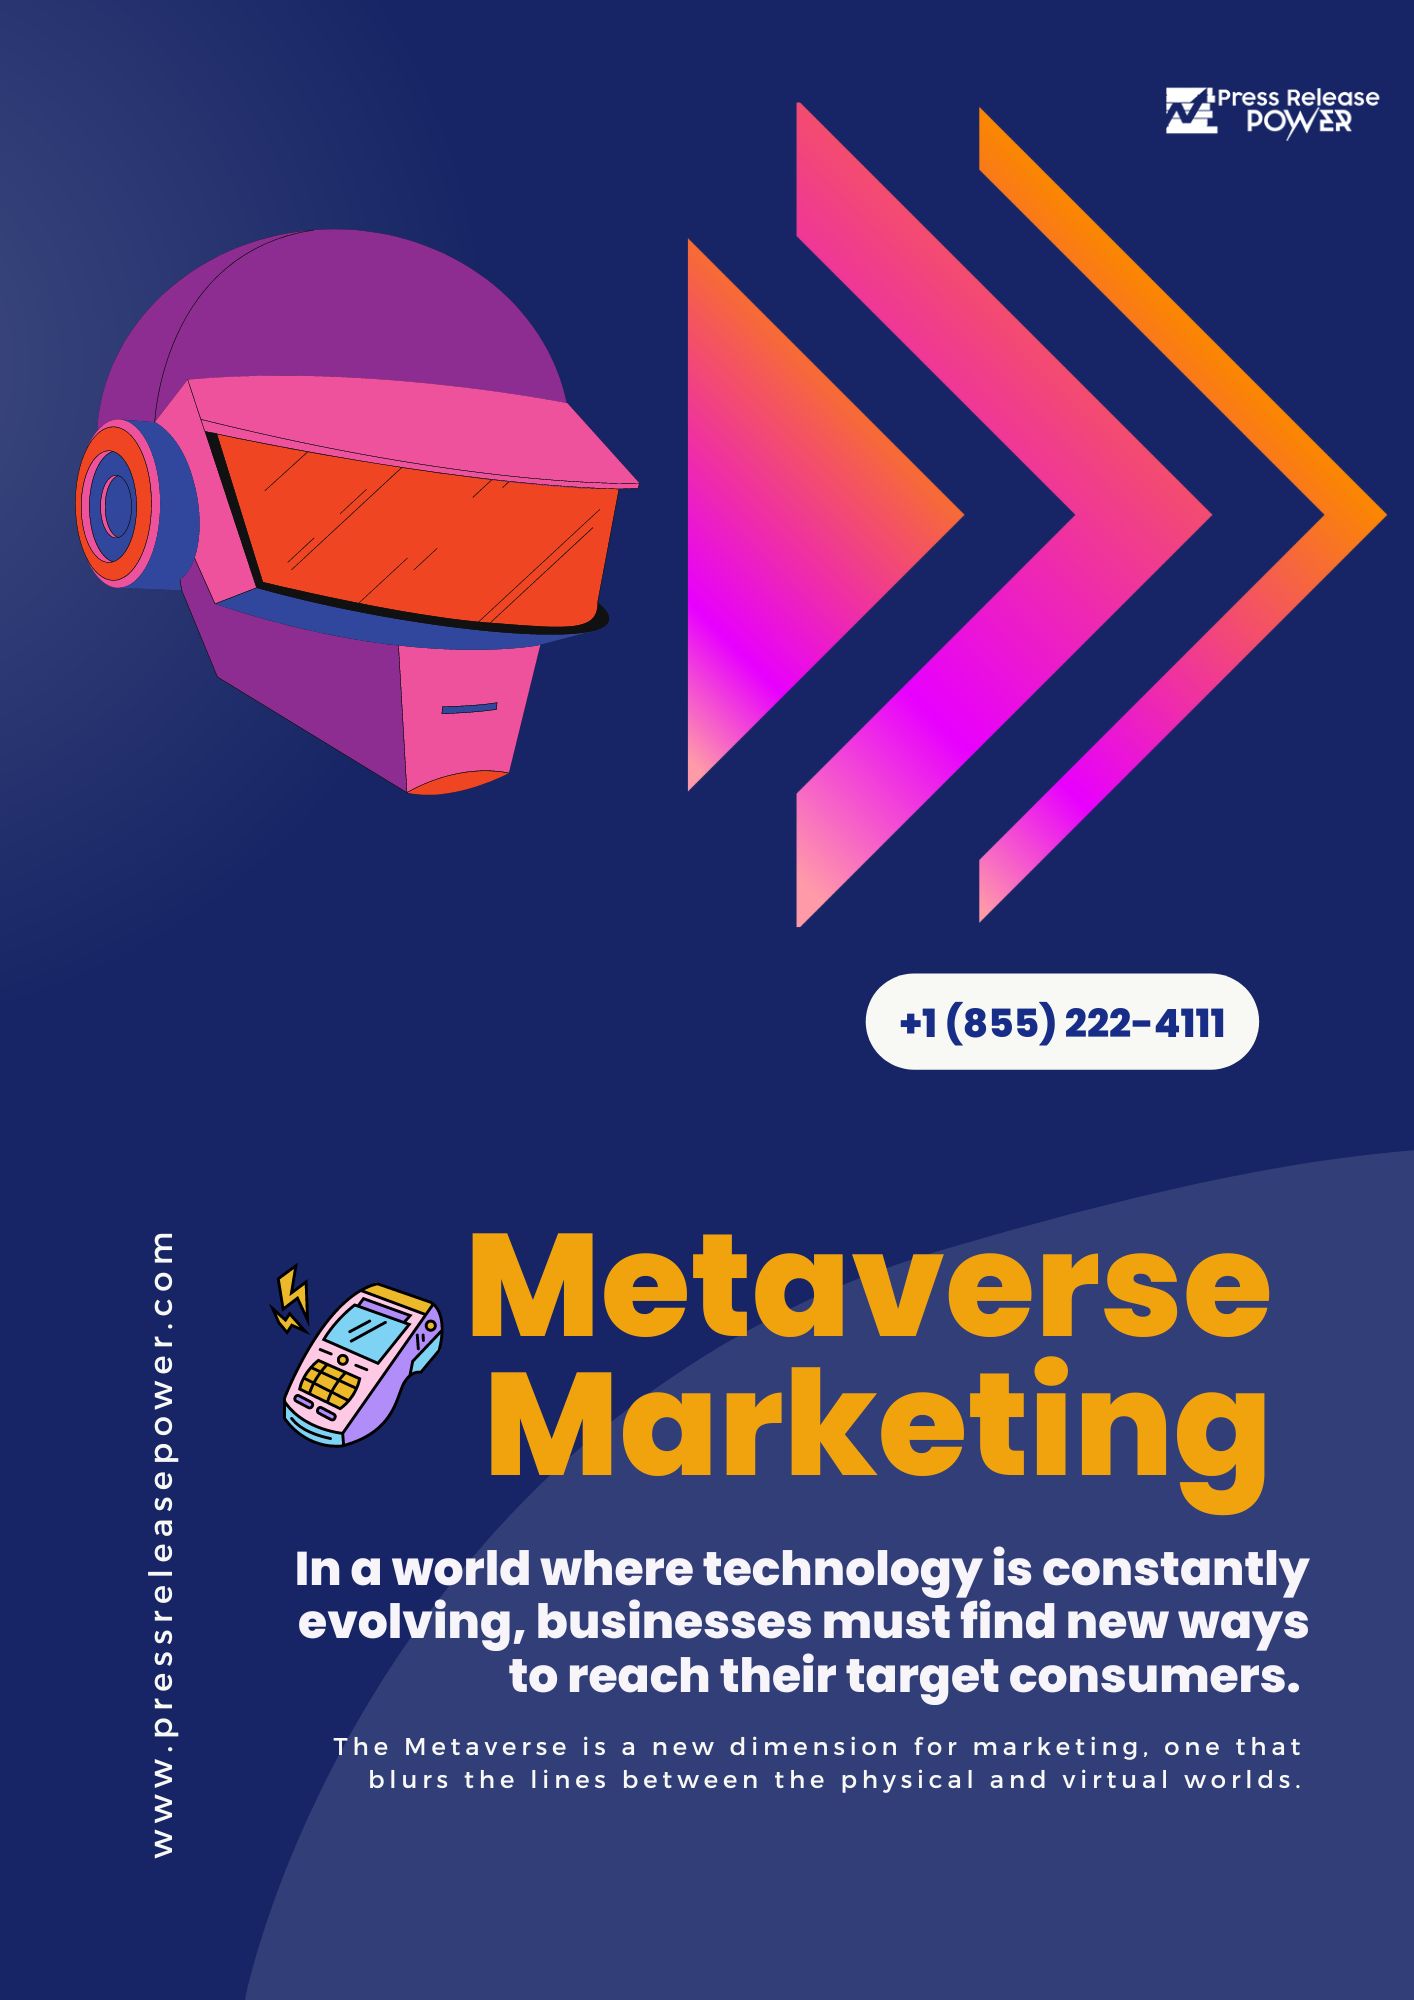 The Metaverse Marketing Agency: A Brave New World For Online Marketing